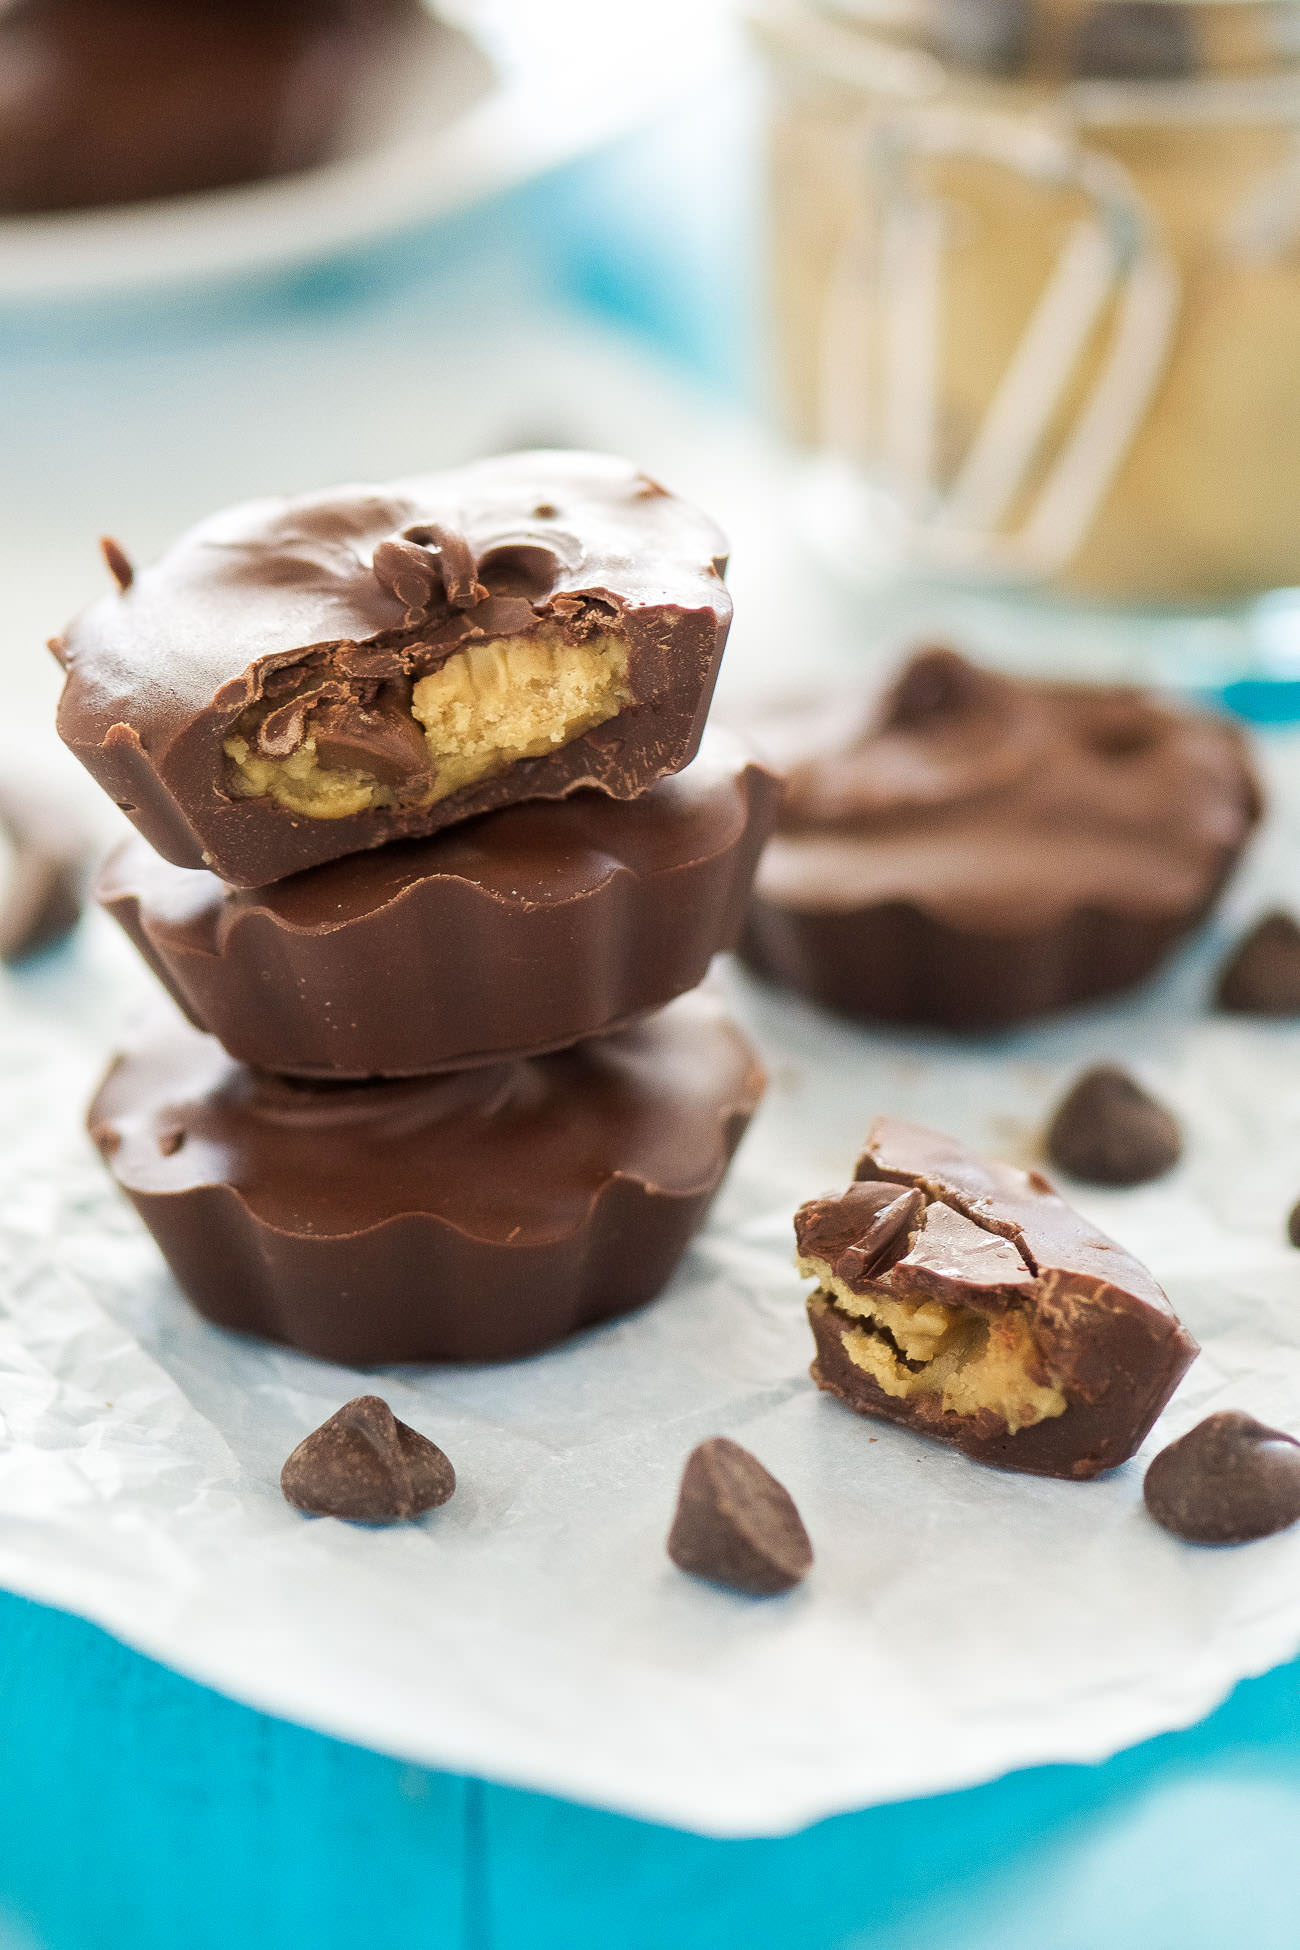 Healthy Cookie Dough Peanut Butter Cups are an upgraded, homemade peanut butter cups! Stuffed with skinny peanut butter cookie dough, these cups are perfect for holidays or to beat that sweet tooth!